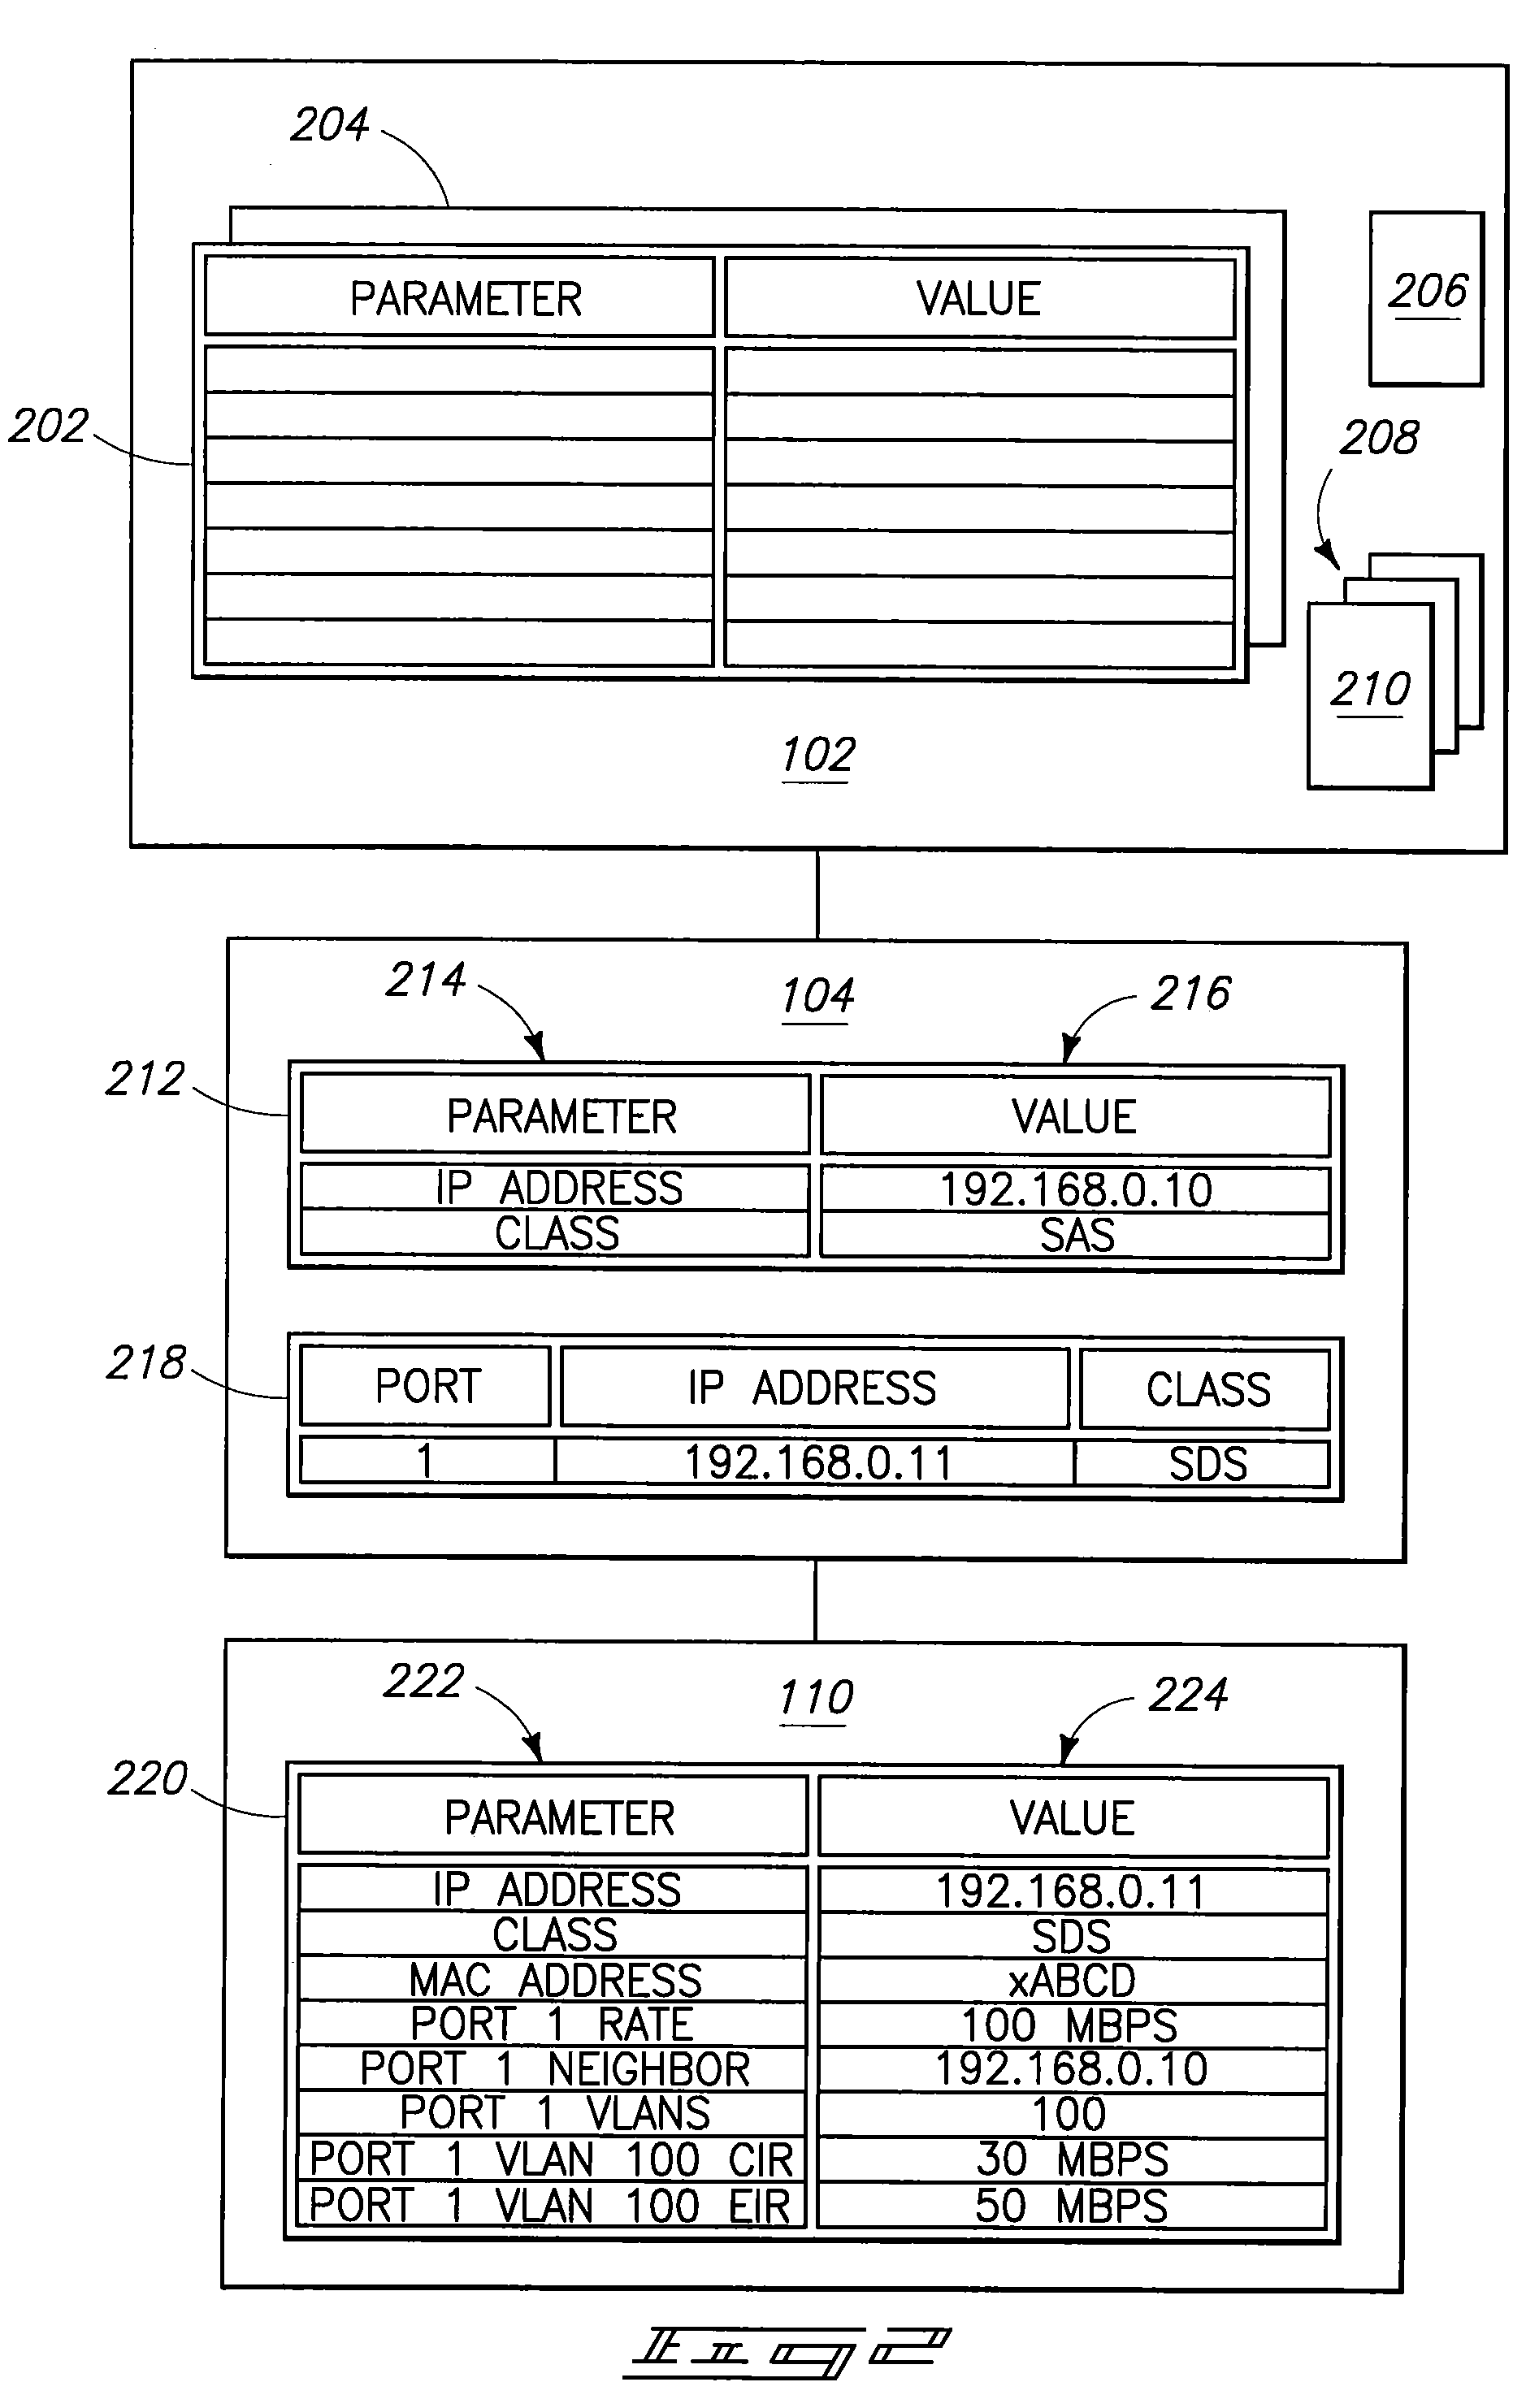 Managing a network element using a template configuration